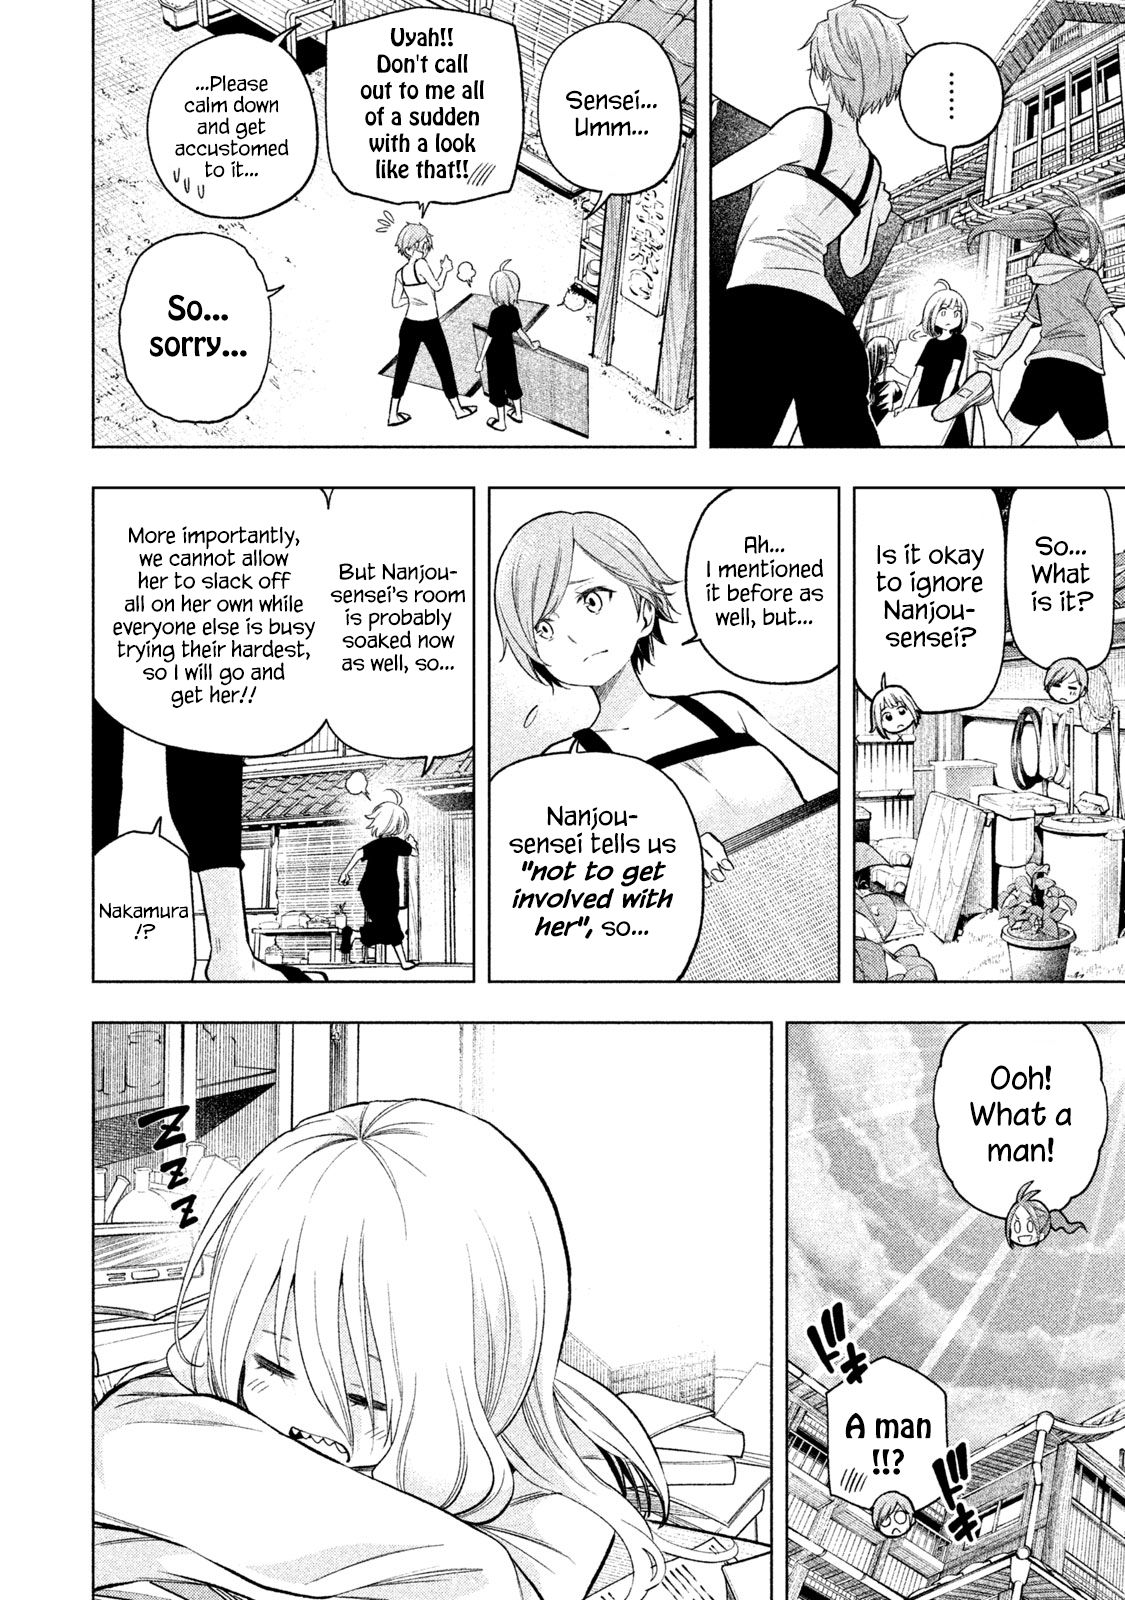 Why are you here Sensei!? - chapter 75 - #4